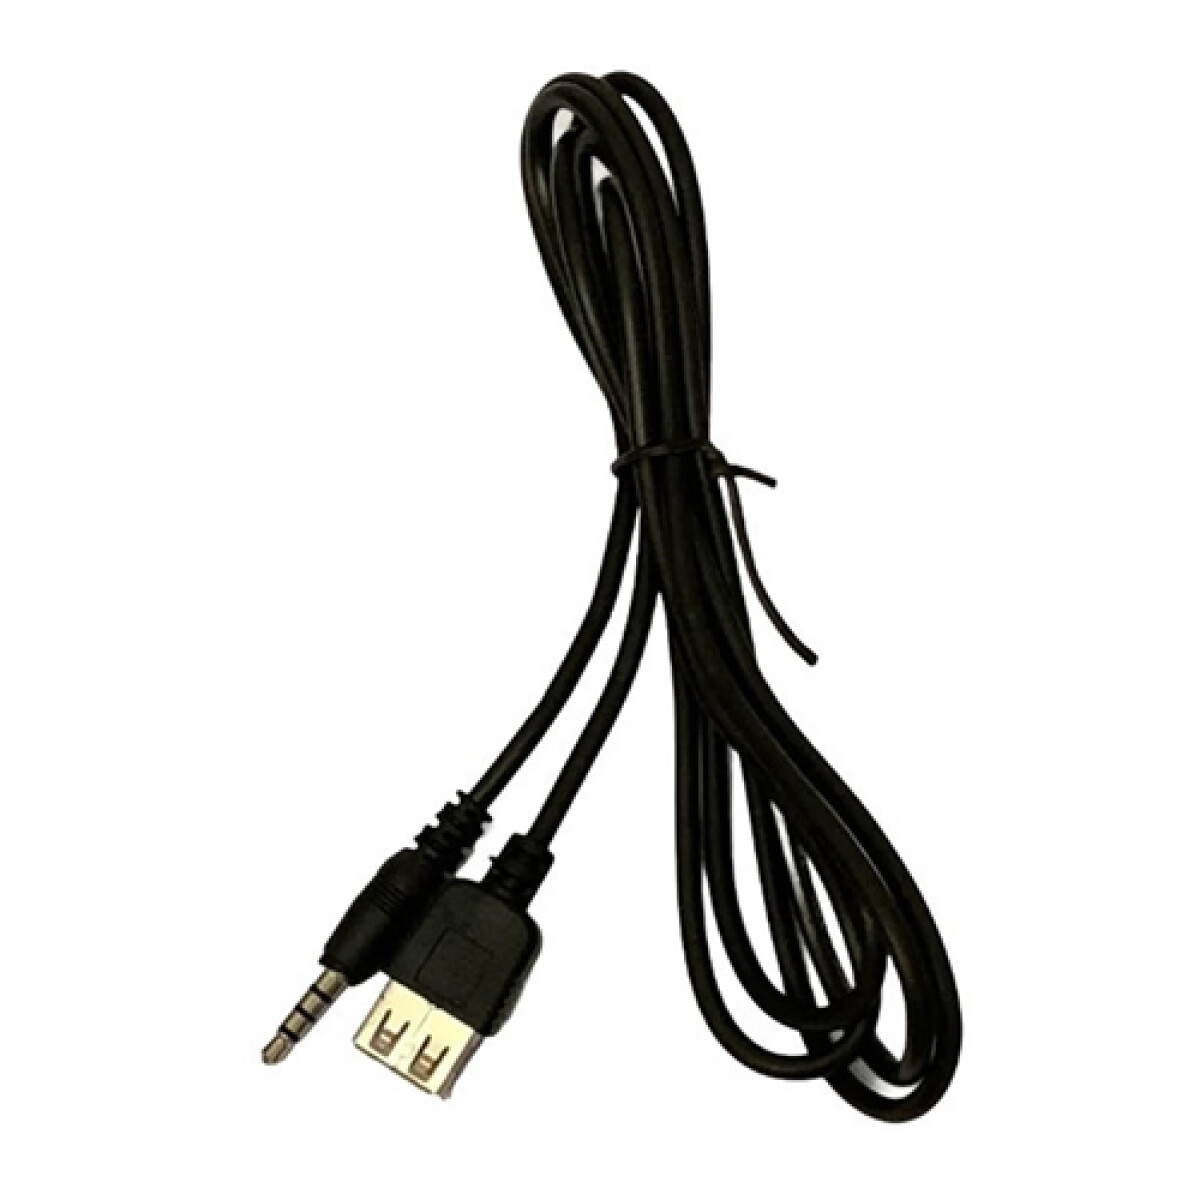 Cable OTG spica a USB hembra 